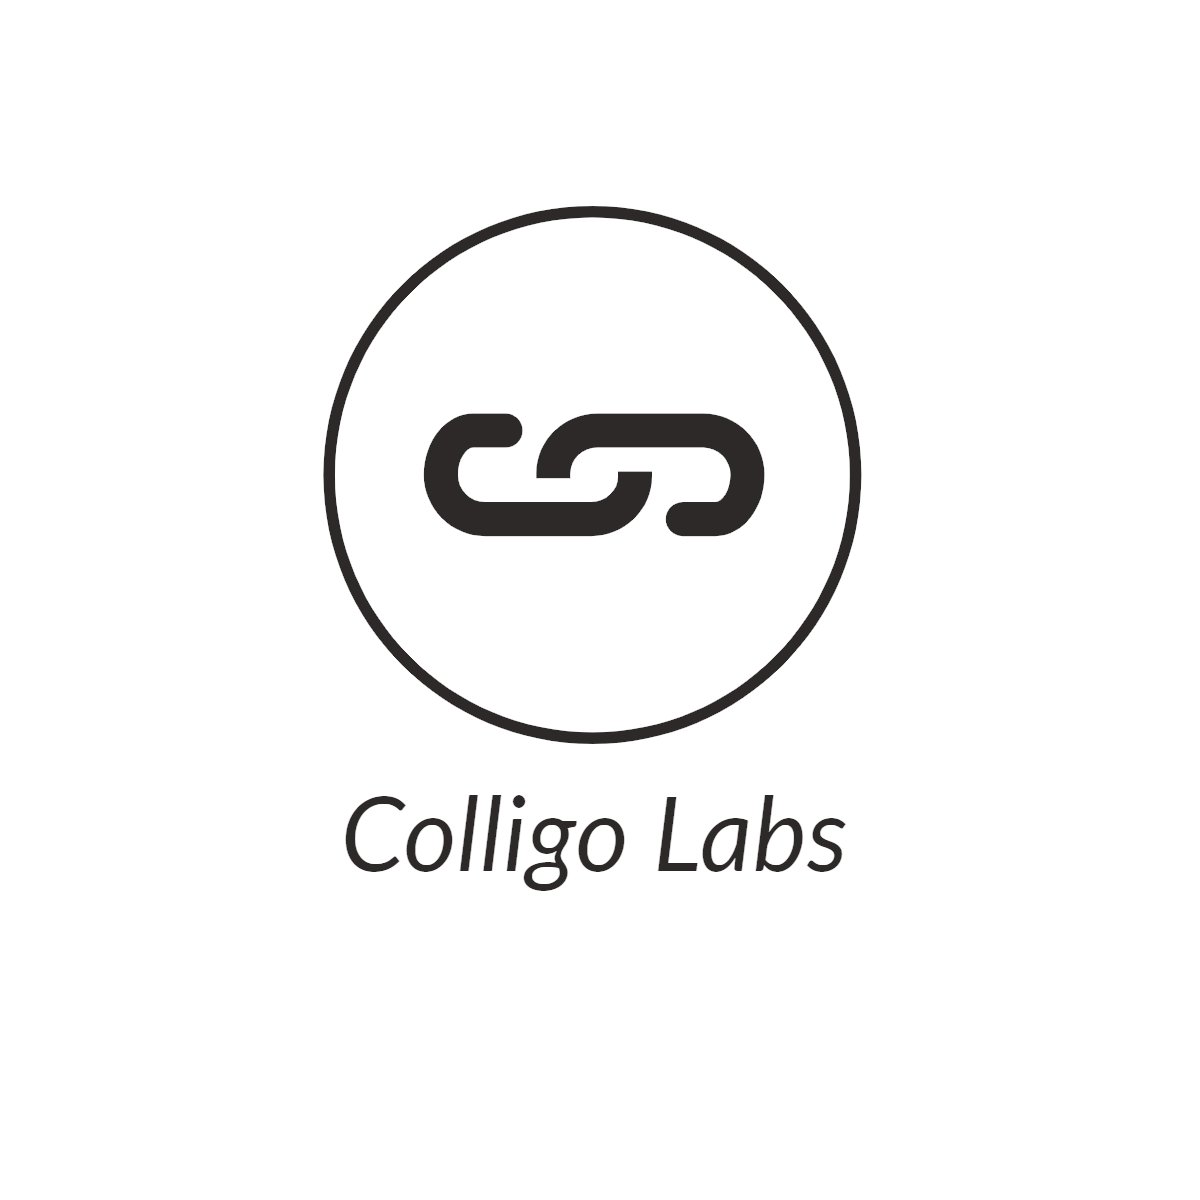 We're thrilled to announce #ColligoLabs as a new partner for this year's @CareInnHub. Read about the challenge, how to apply and how our partners' mentorship will help nurture new ideas, designs and innovations for the care sector nationalcareforum.org.uk/ncf-press-rele…